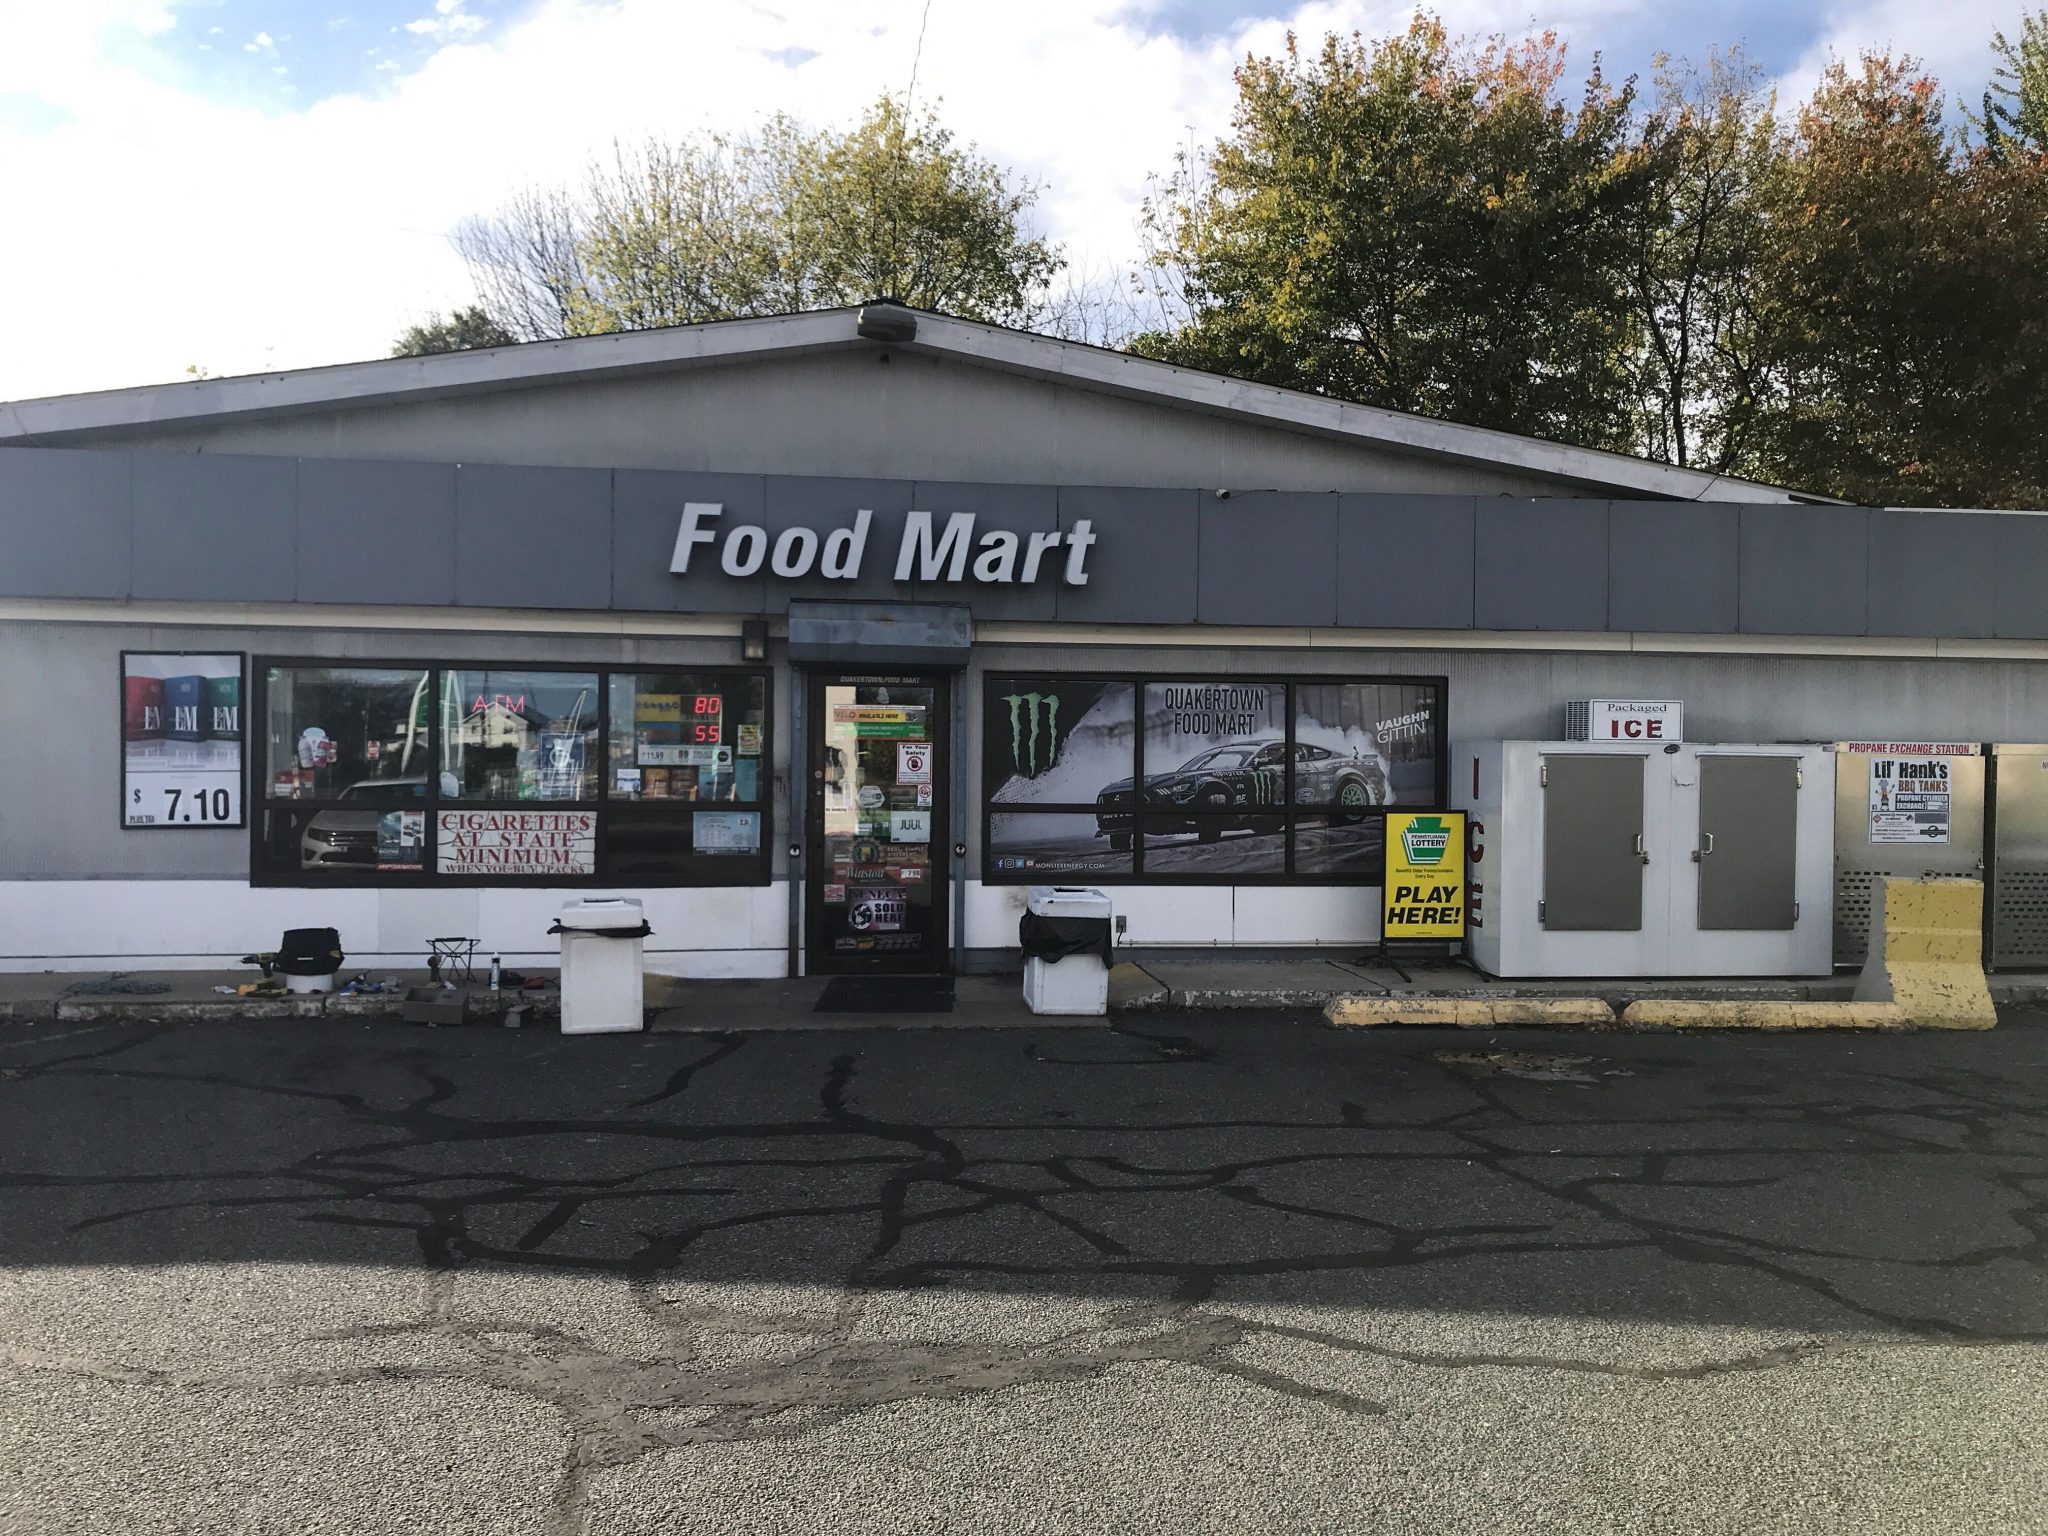 Bitcoin ATM Quakertown Foodmart ChainByes operated by Hippo Kiosk